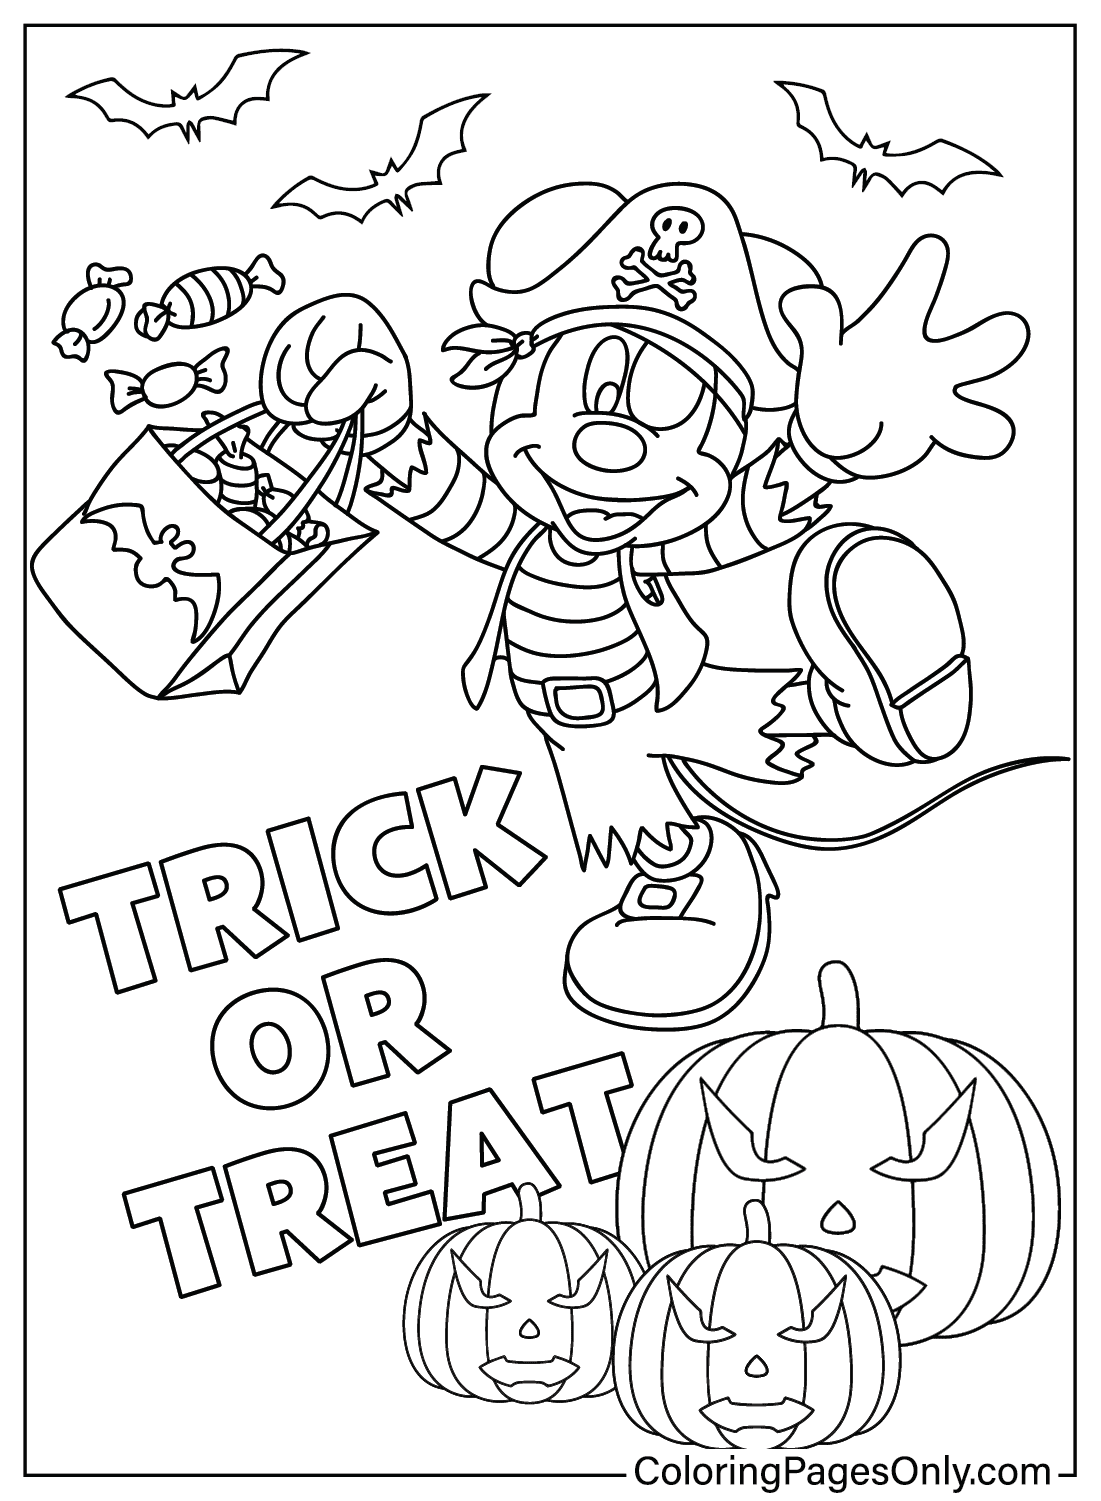 Coloring Page Mickey Halloween from Mickey Halloween